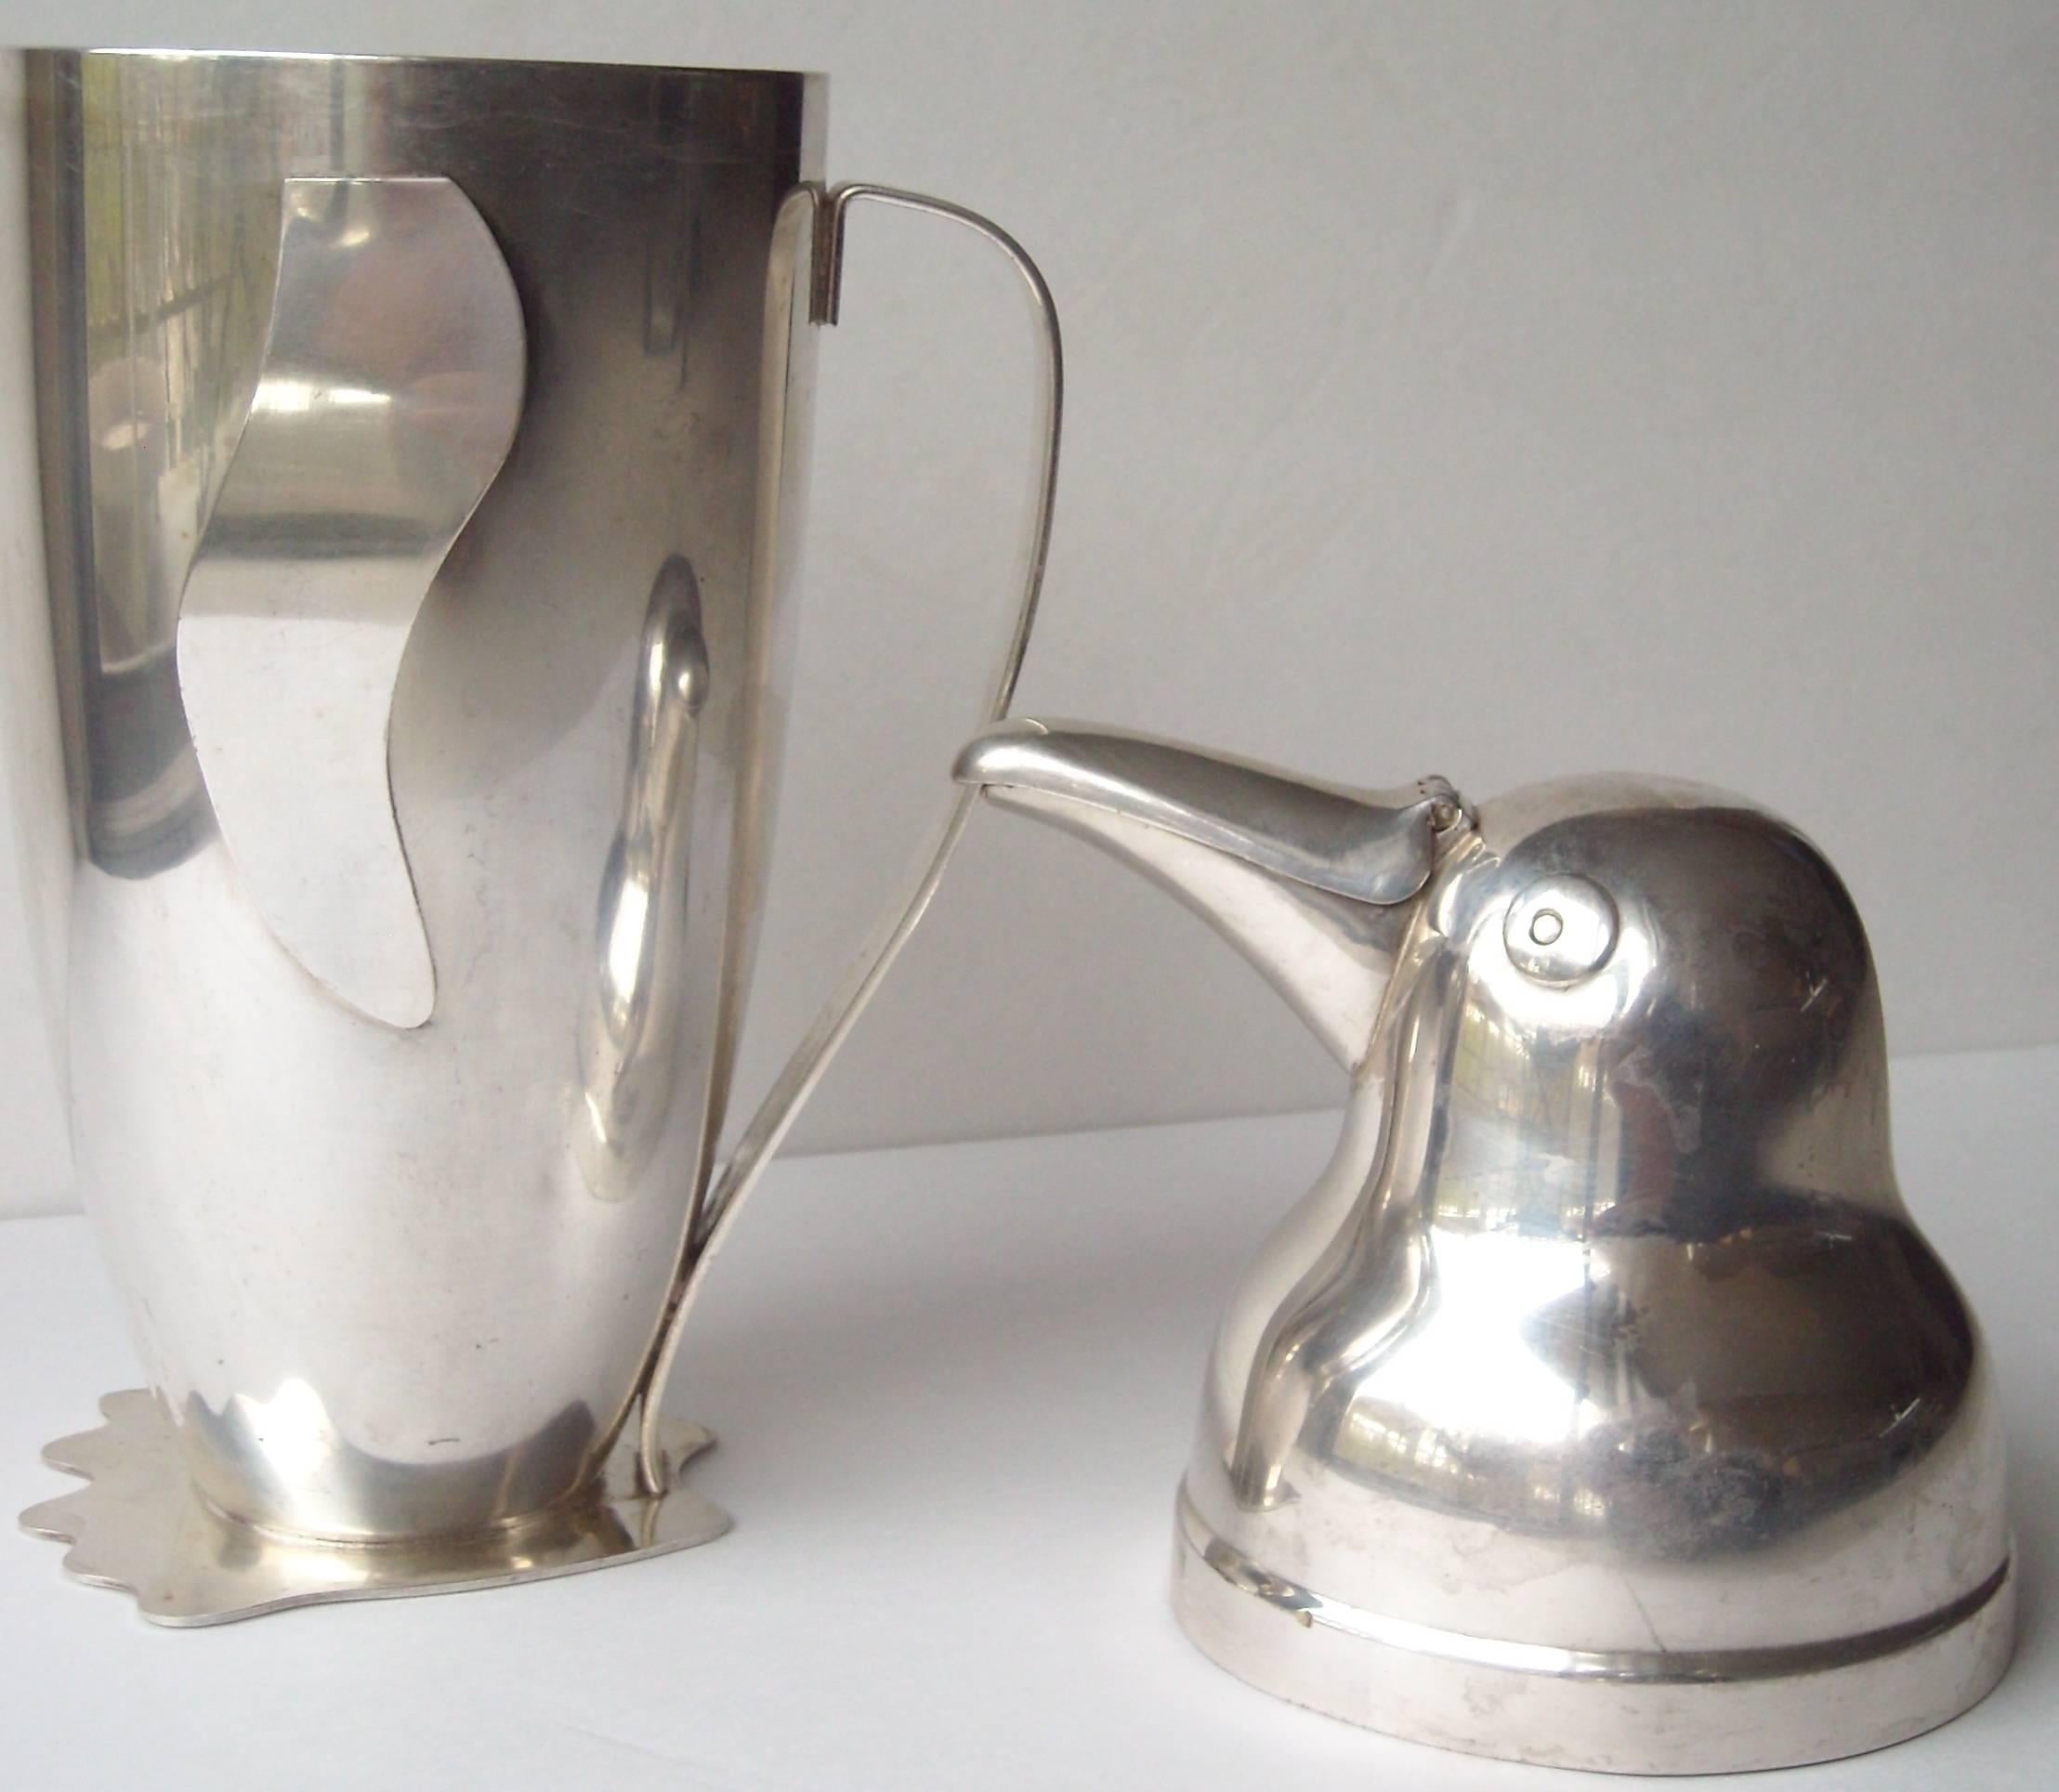 American Napier Silver Plate Cocktail Shaker, Designed by Emile Schuelke, in 1936, Marked